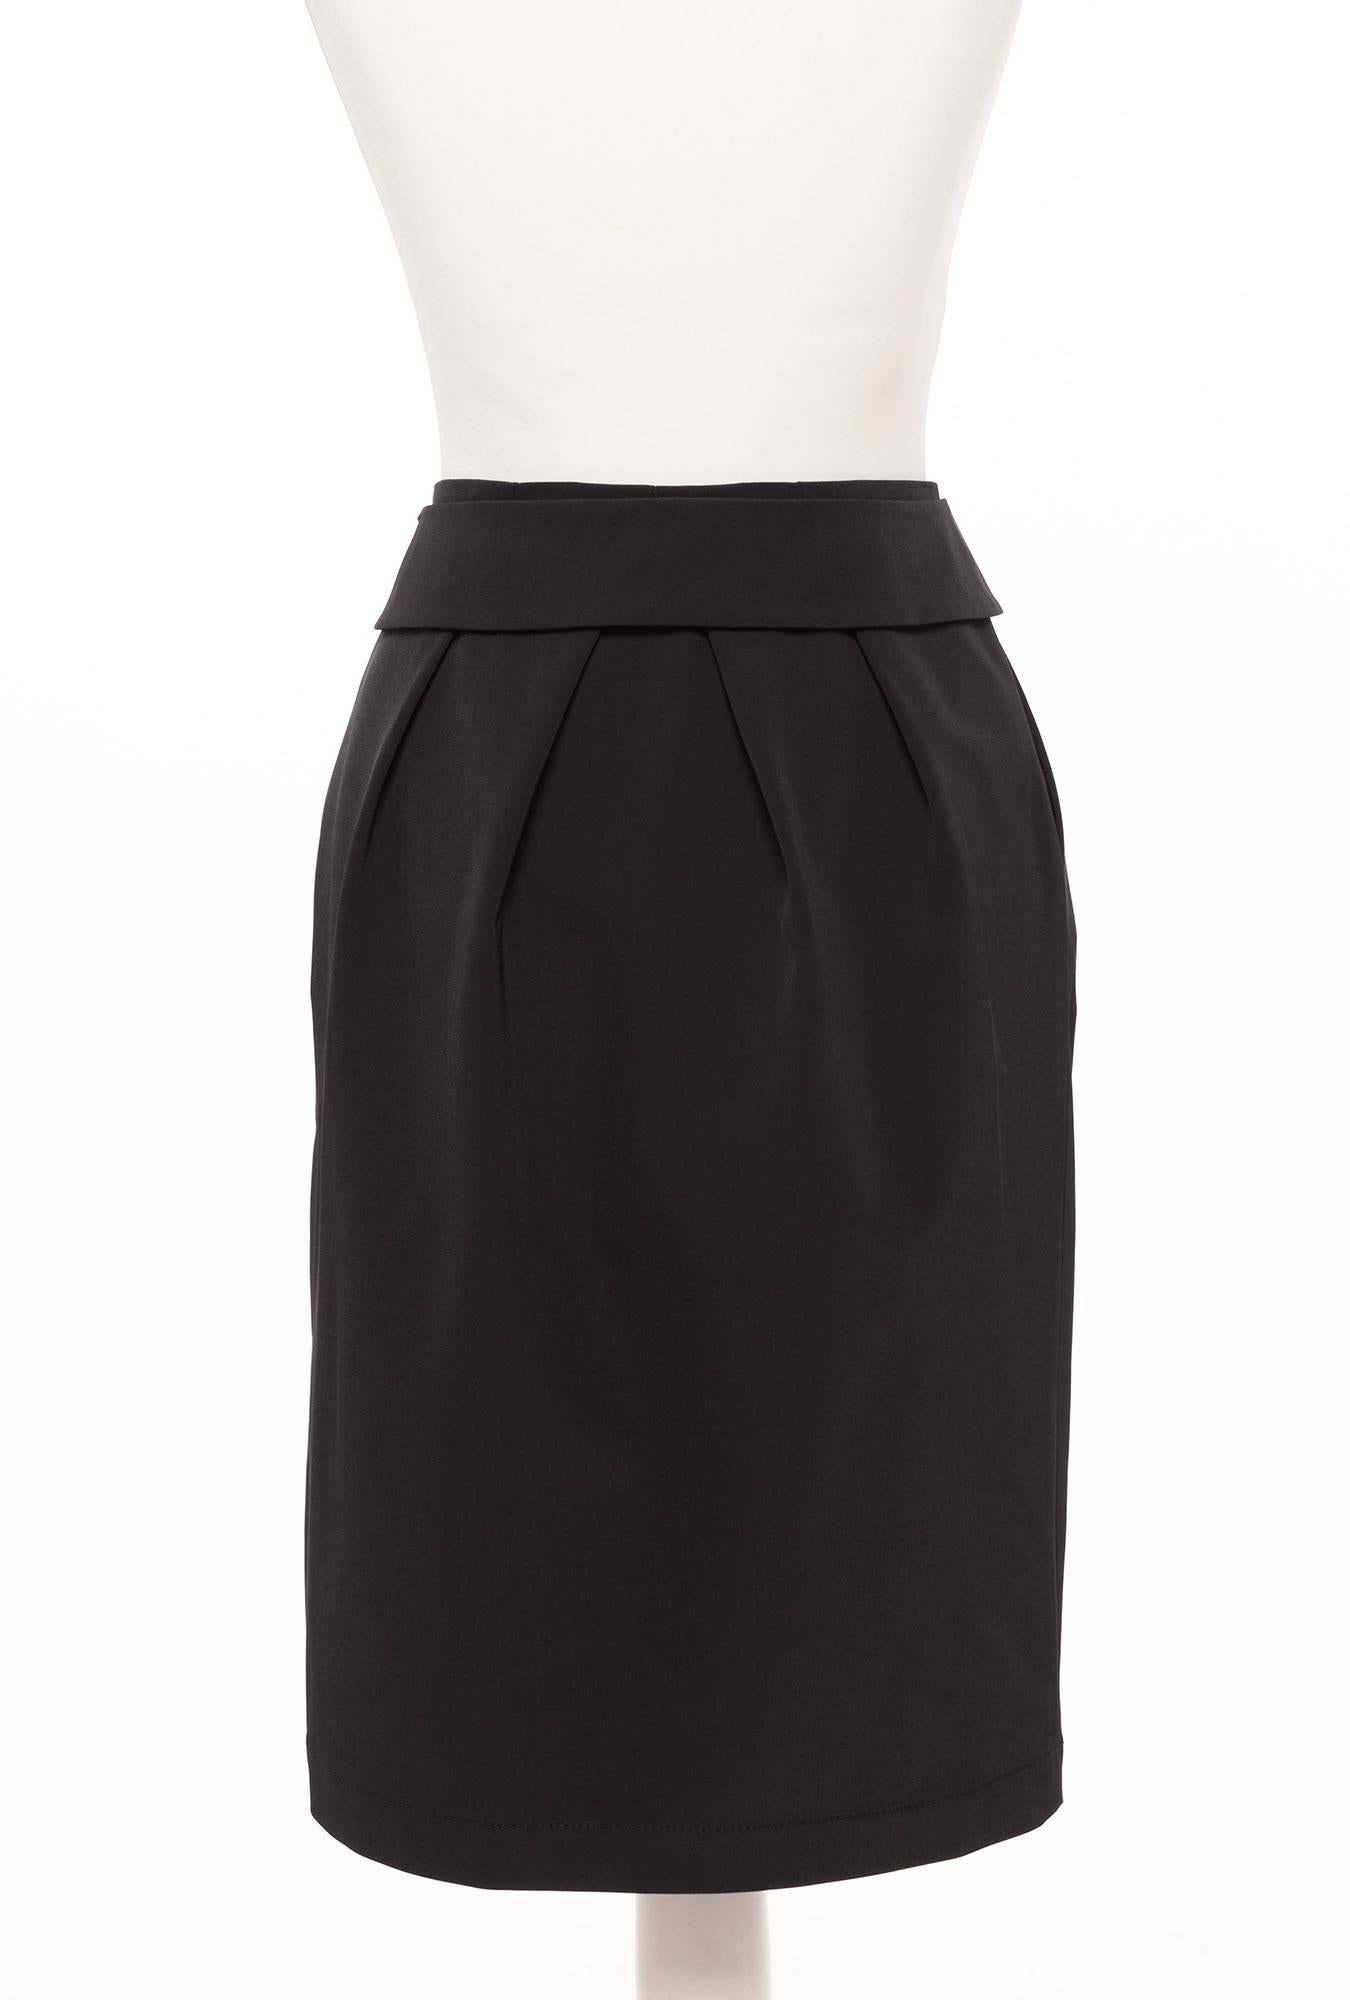 Women's 90's Prada vintage skirt with large front pleats, Sz. 4 For Sale